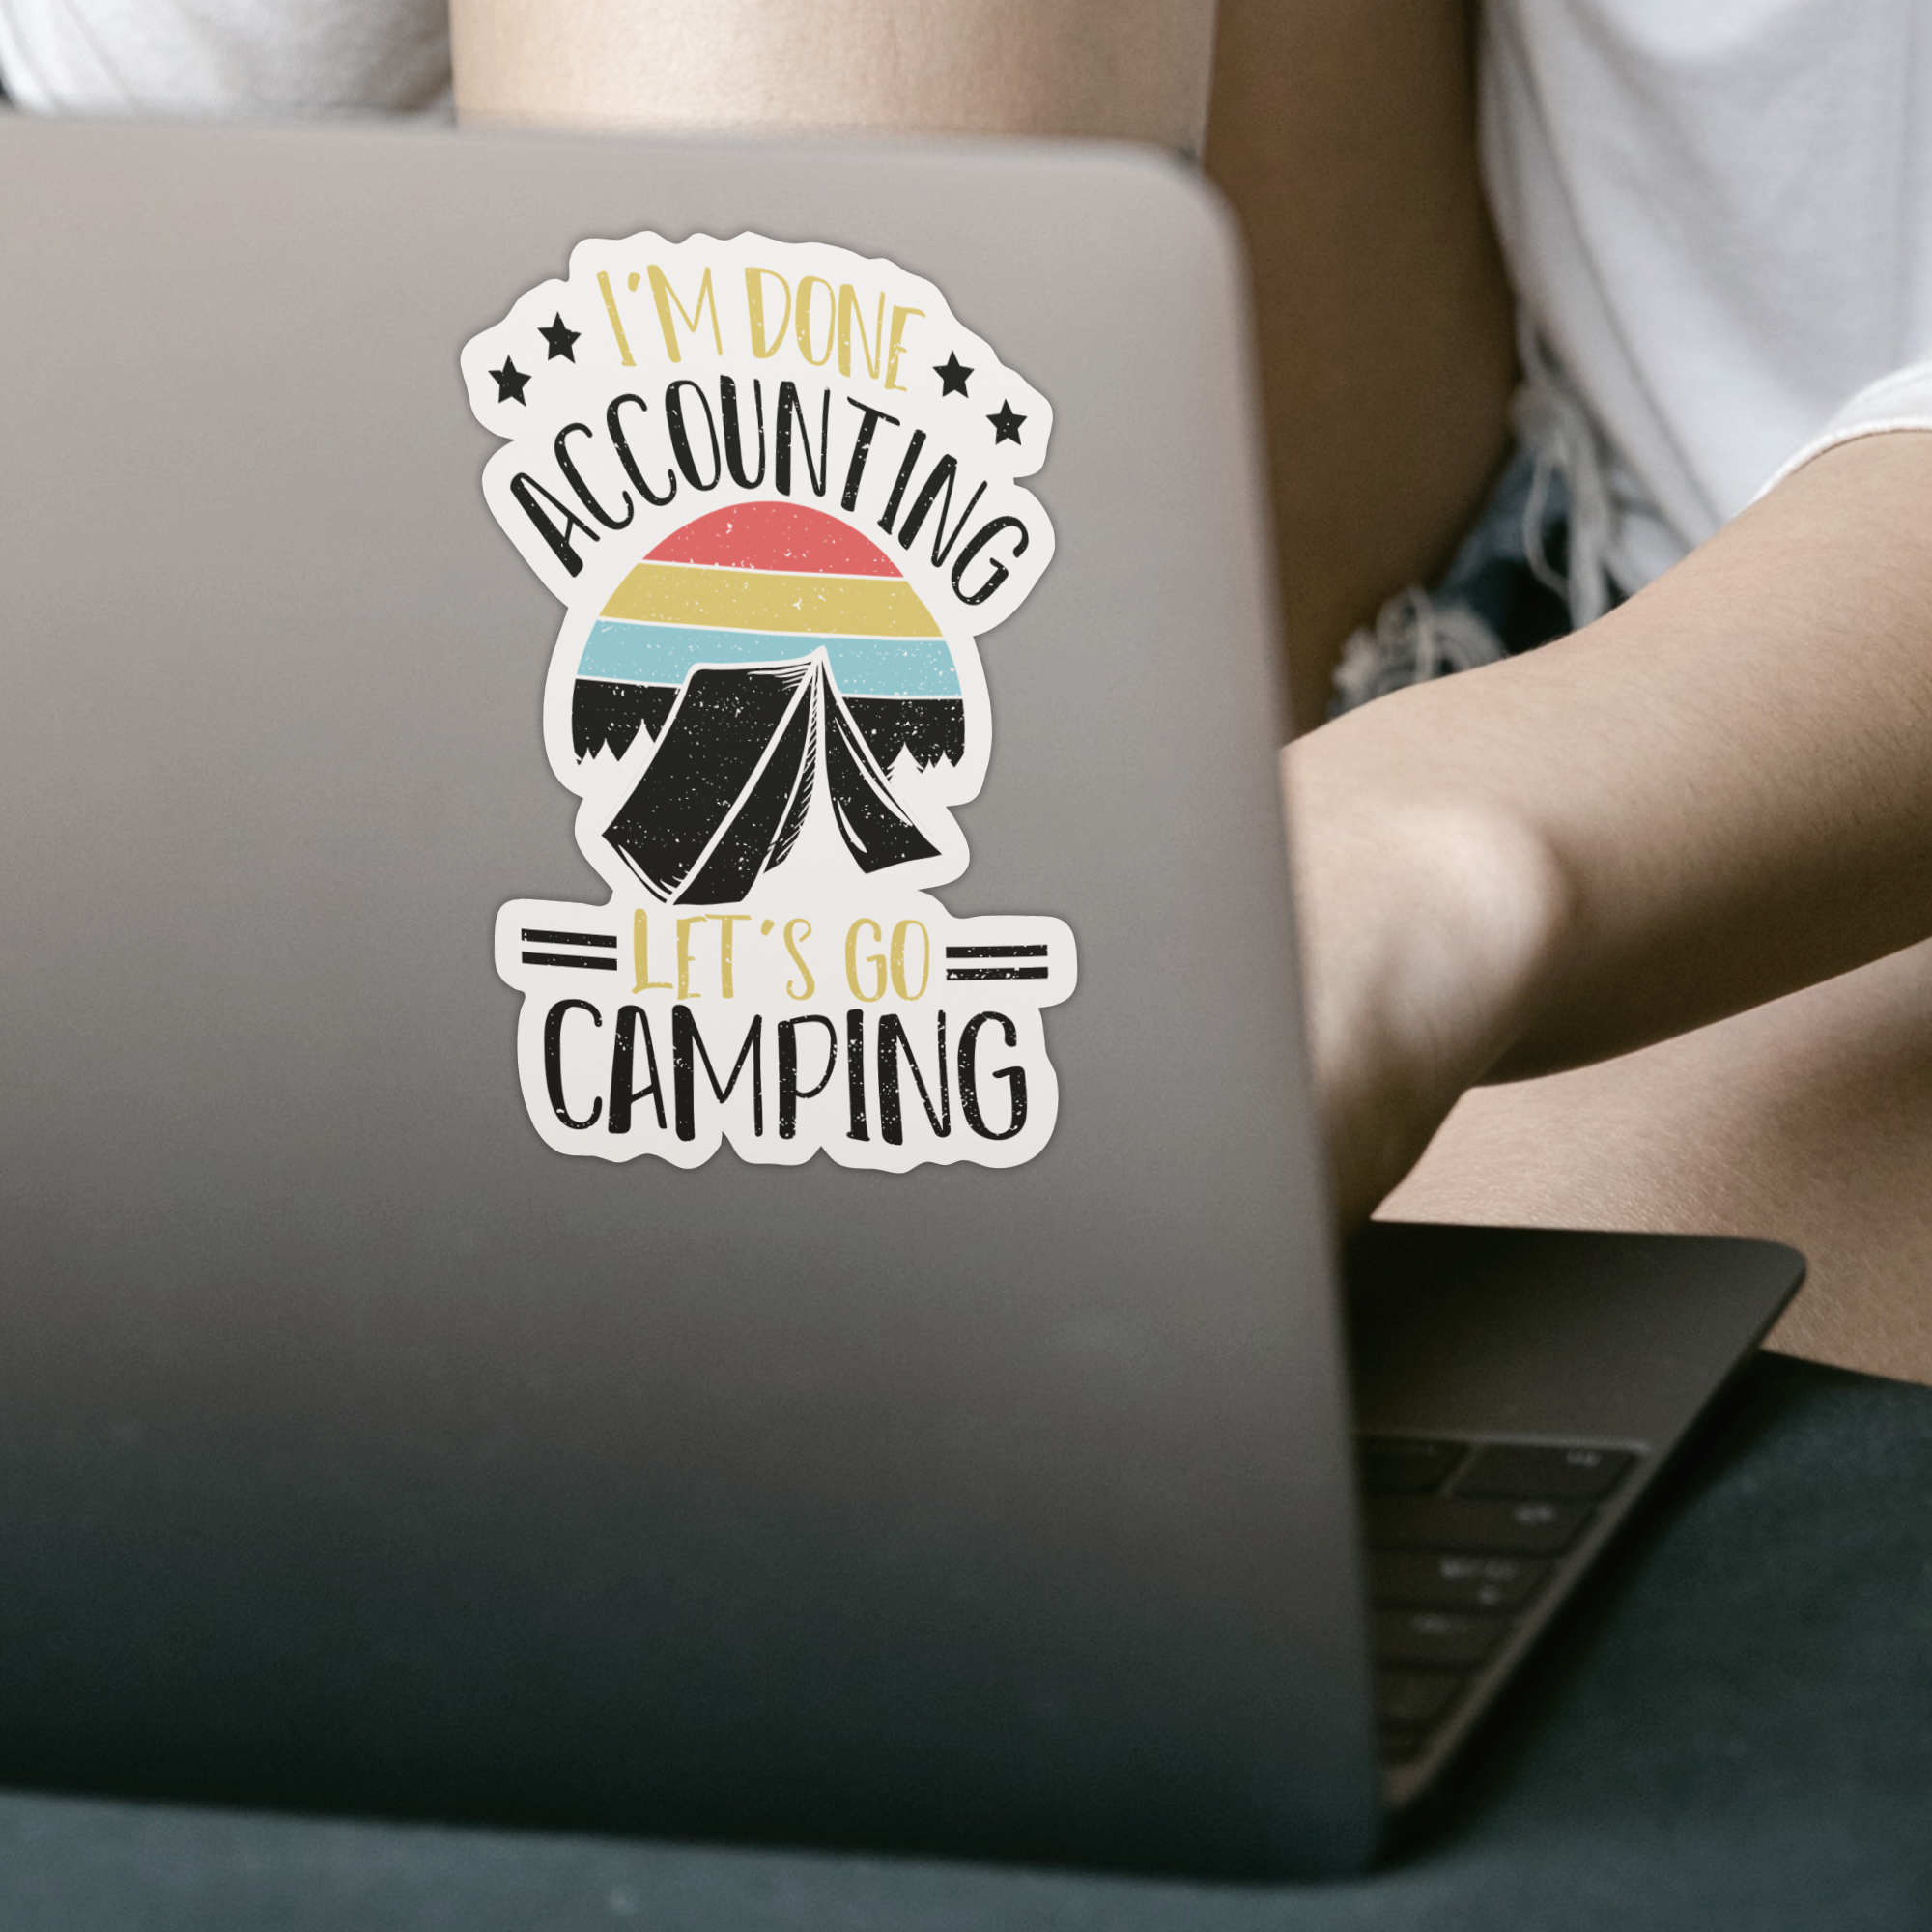 I'm Done Accounting Let's Go Camping Sticker - DESIGNSBYJNK5.COM